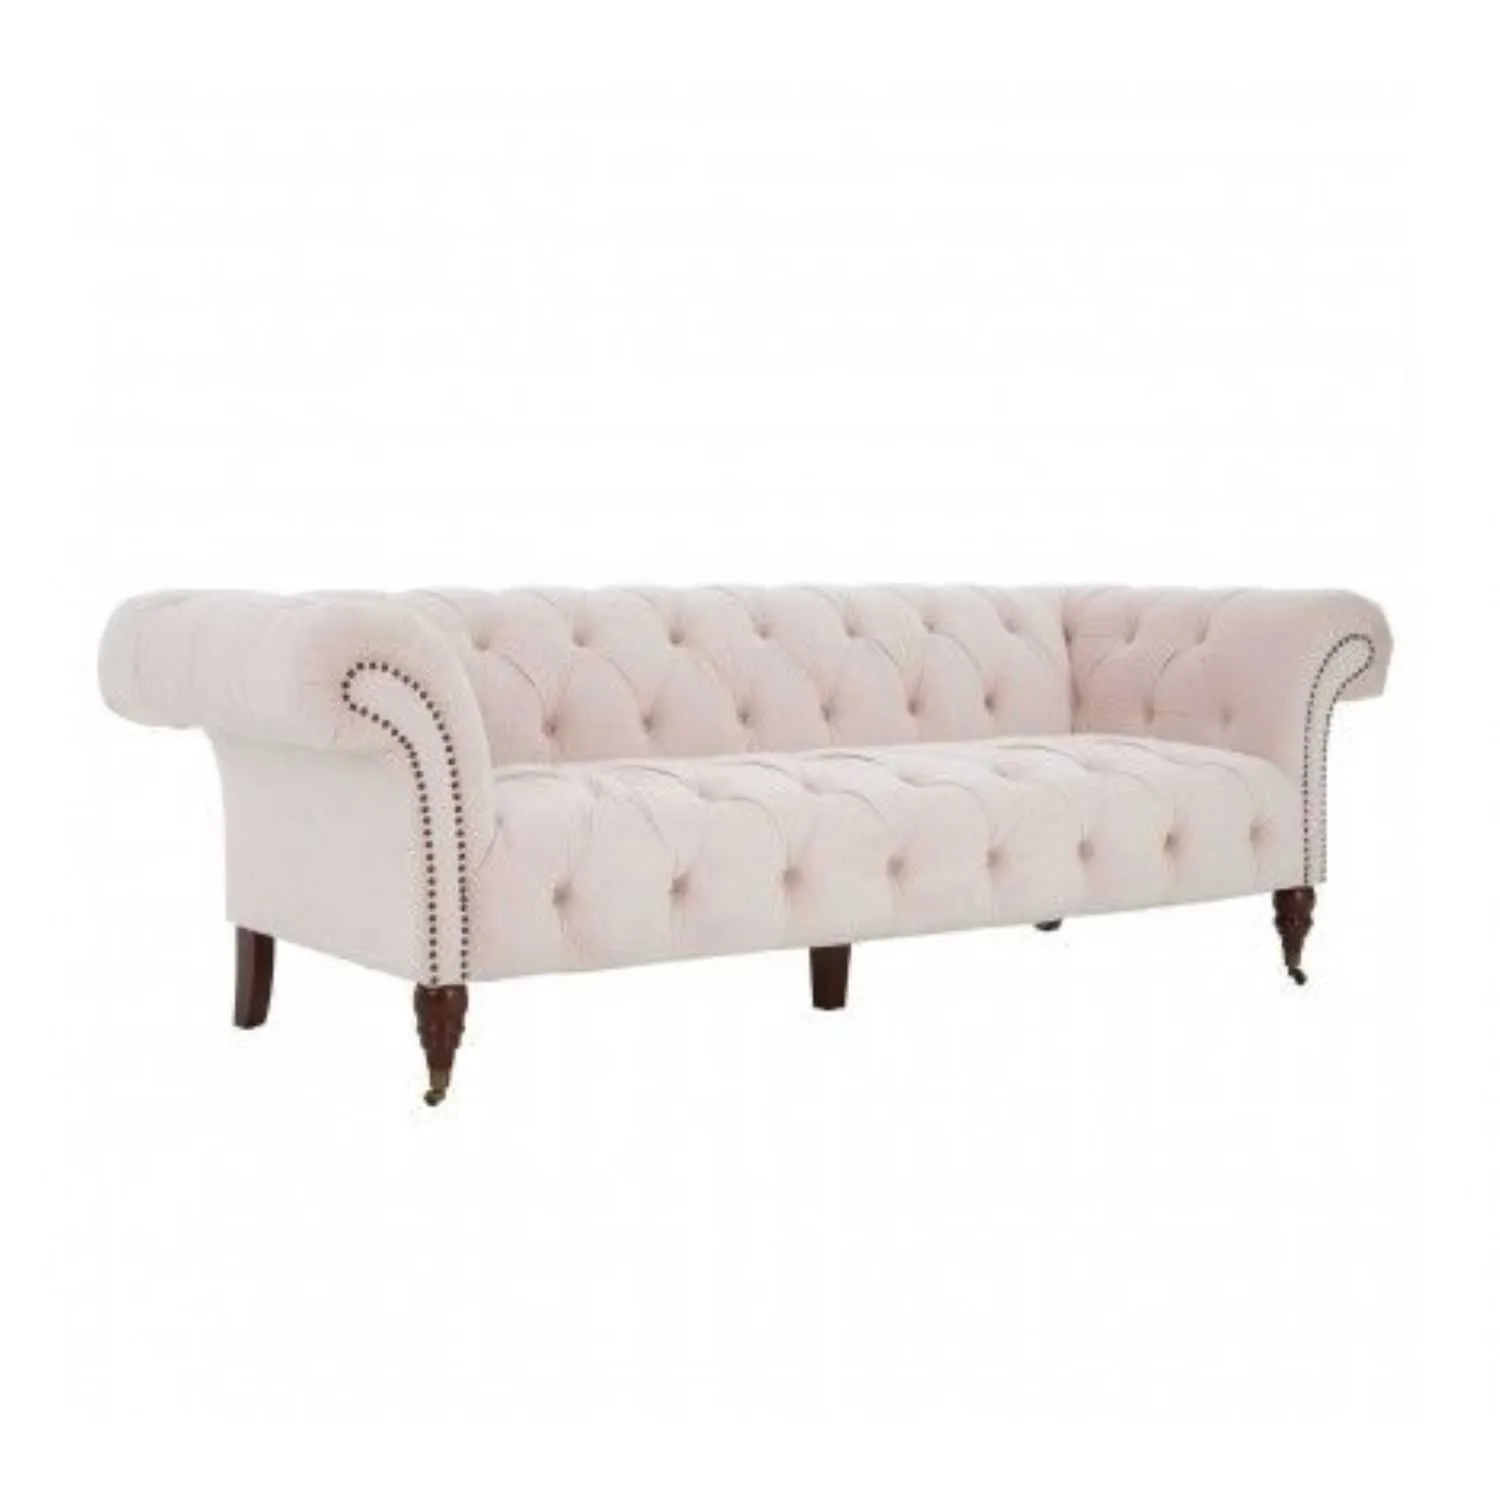 Sarla 3 Seater Chesterfield Sofa Blus Pink